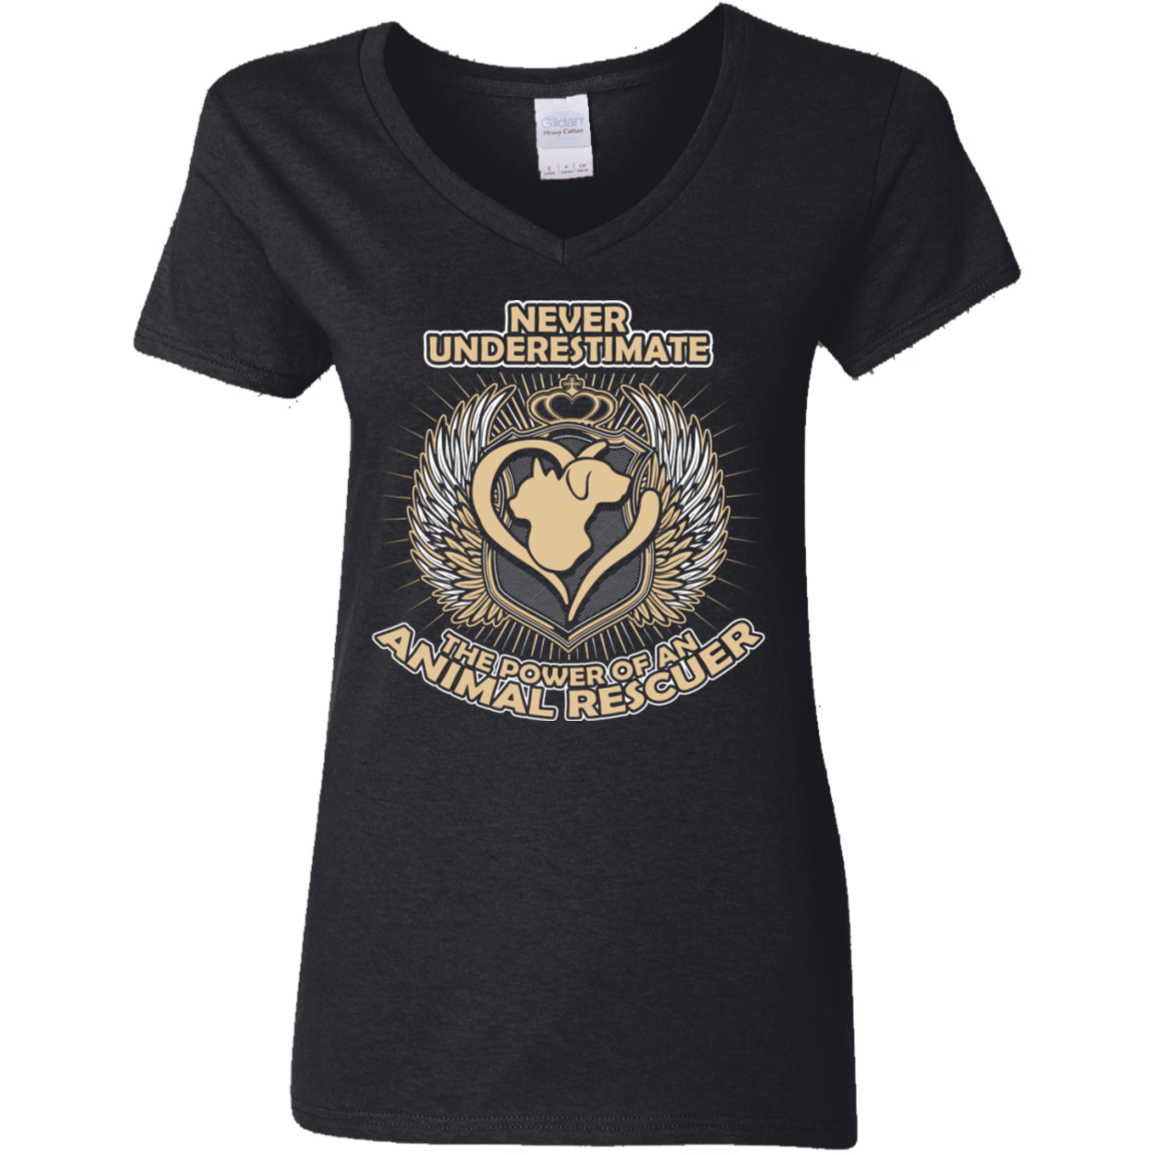 Power Of An Animal Rescuer - Ladies V Neck.